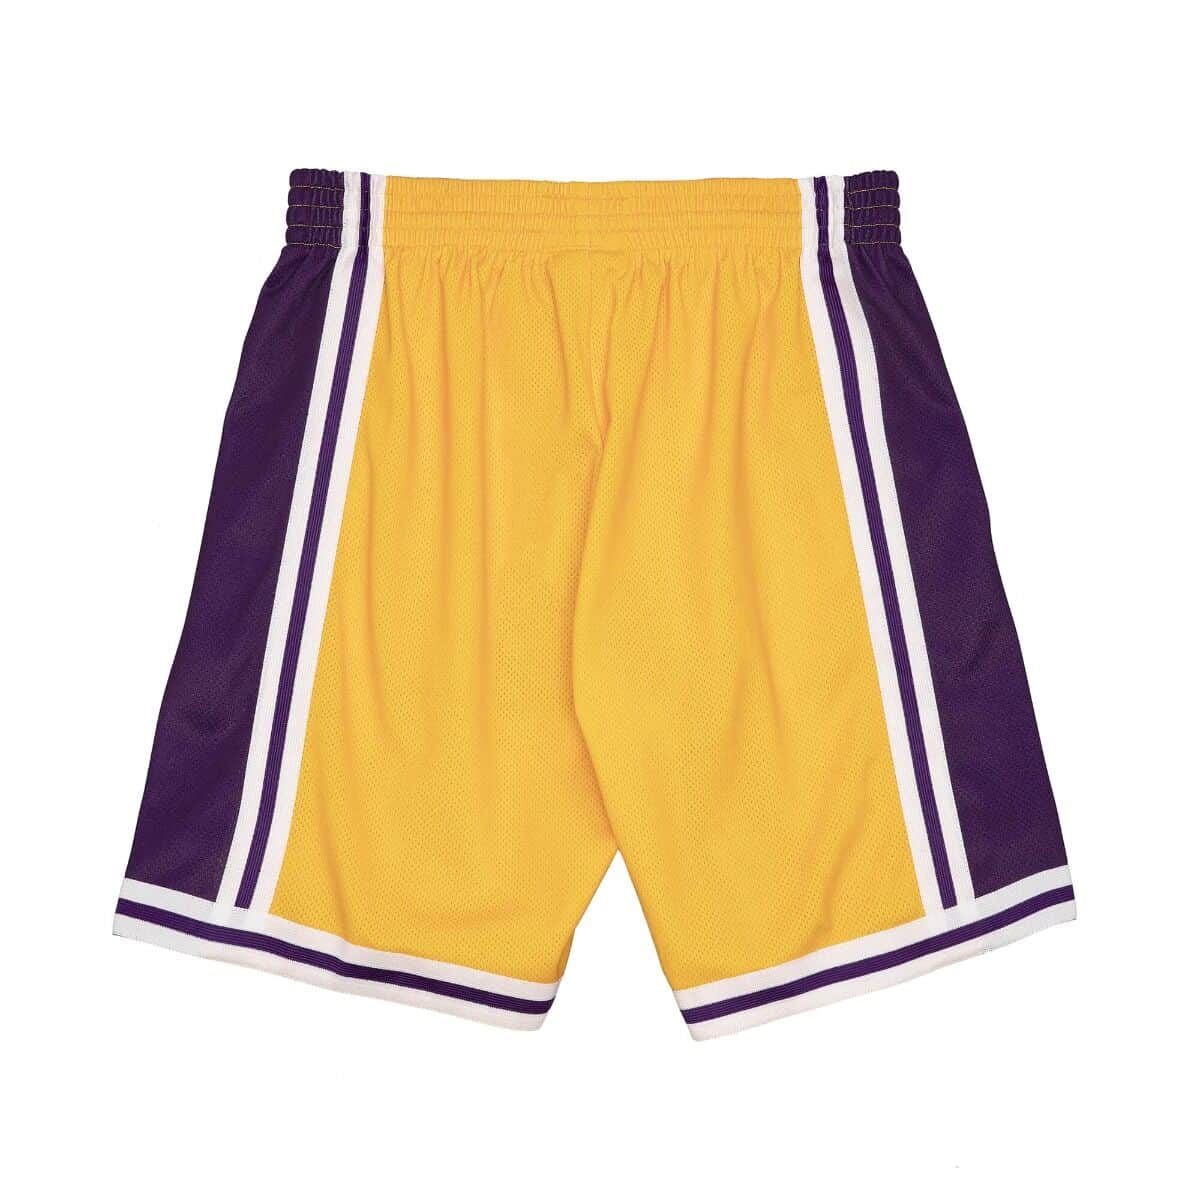 Mitchell & Ness Big Face 2.0 Los Angeles Lakers Yellow Shorts